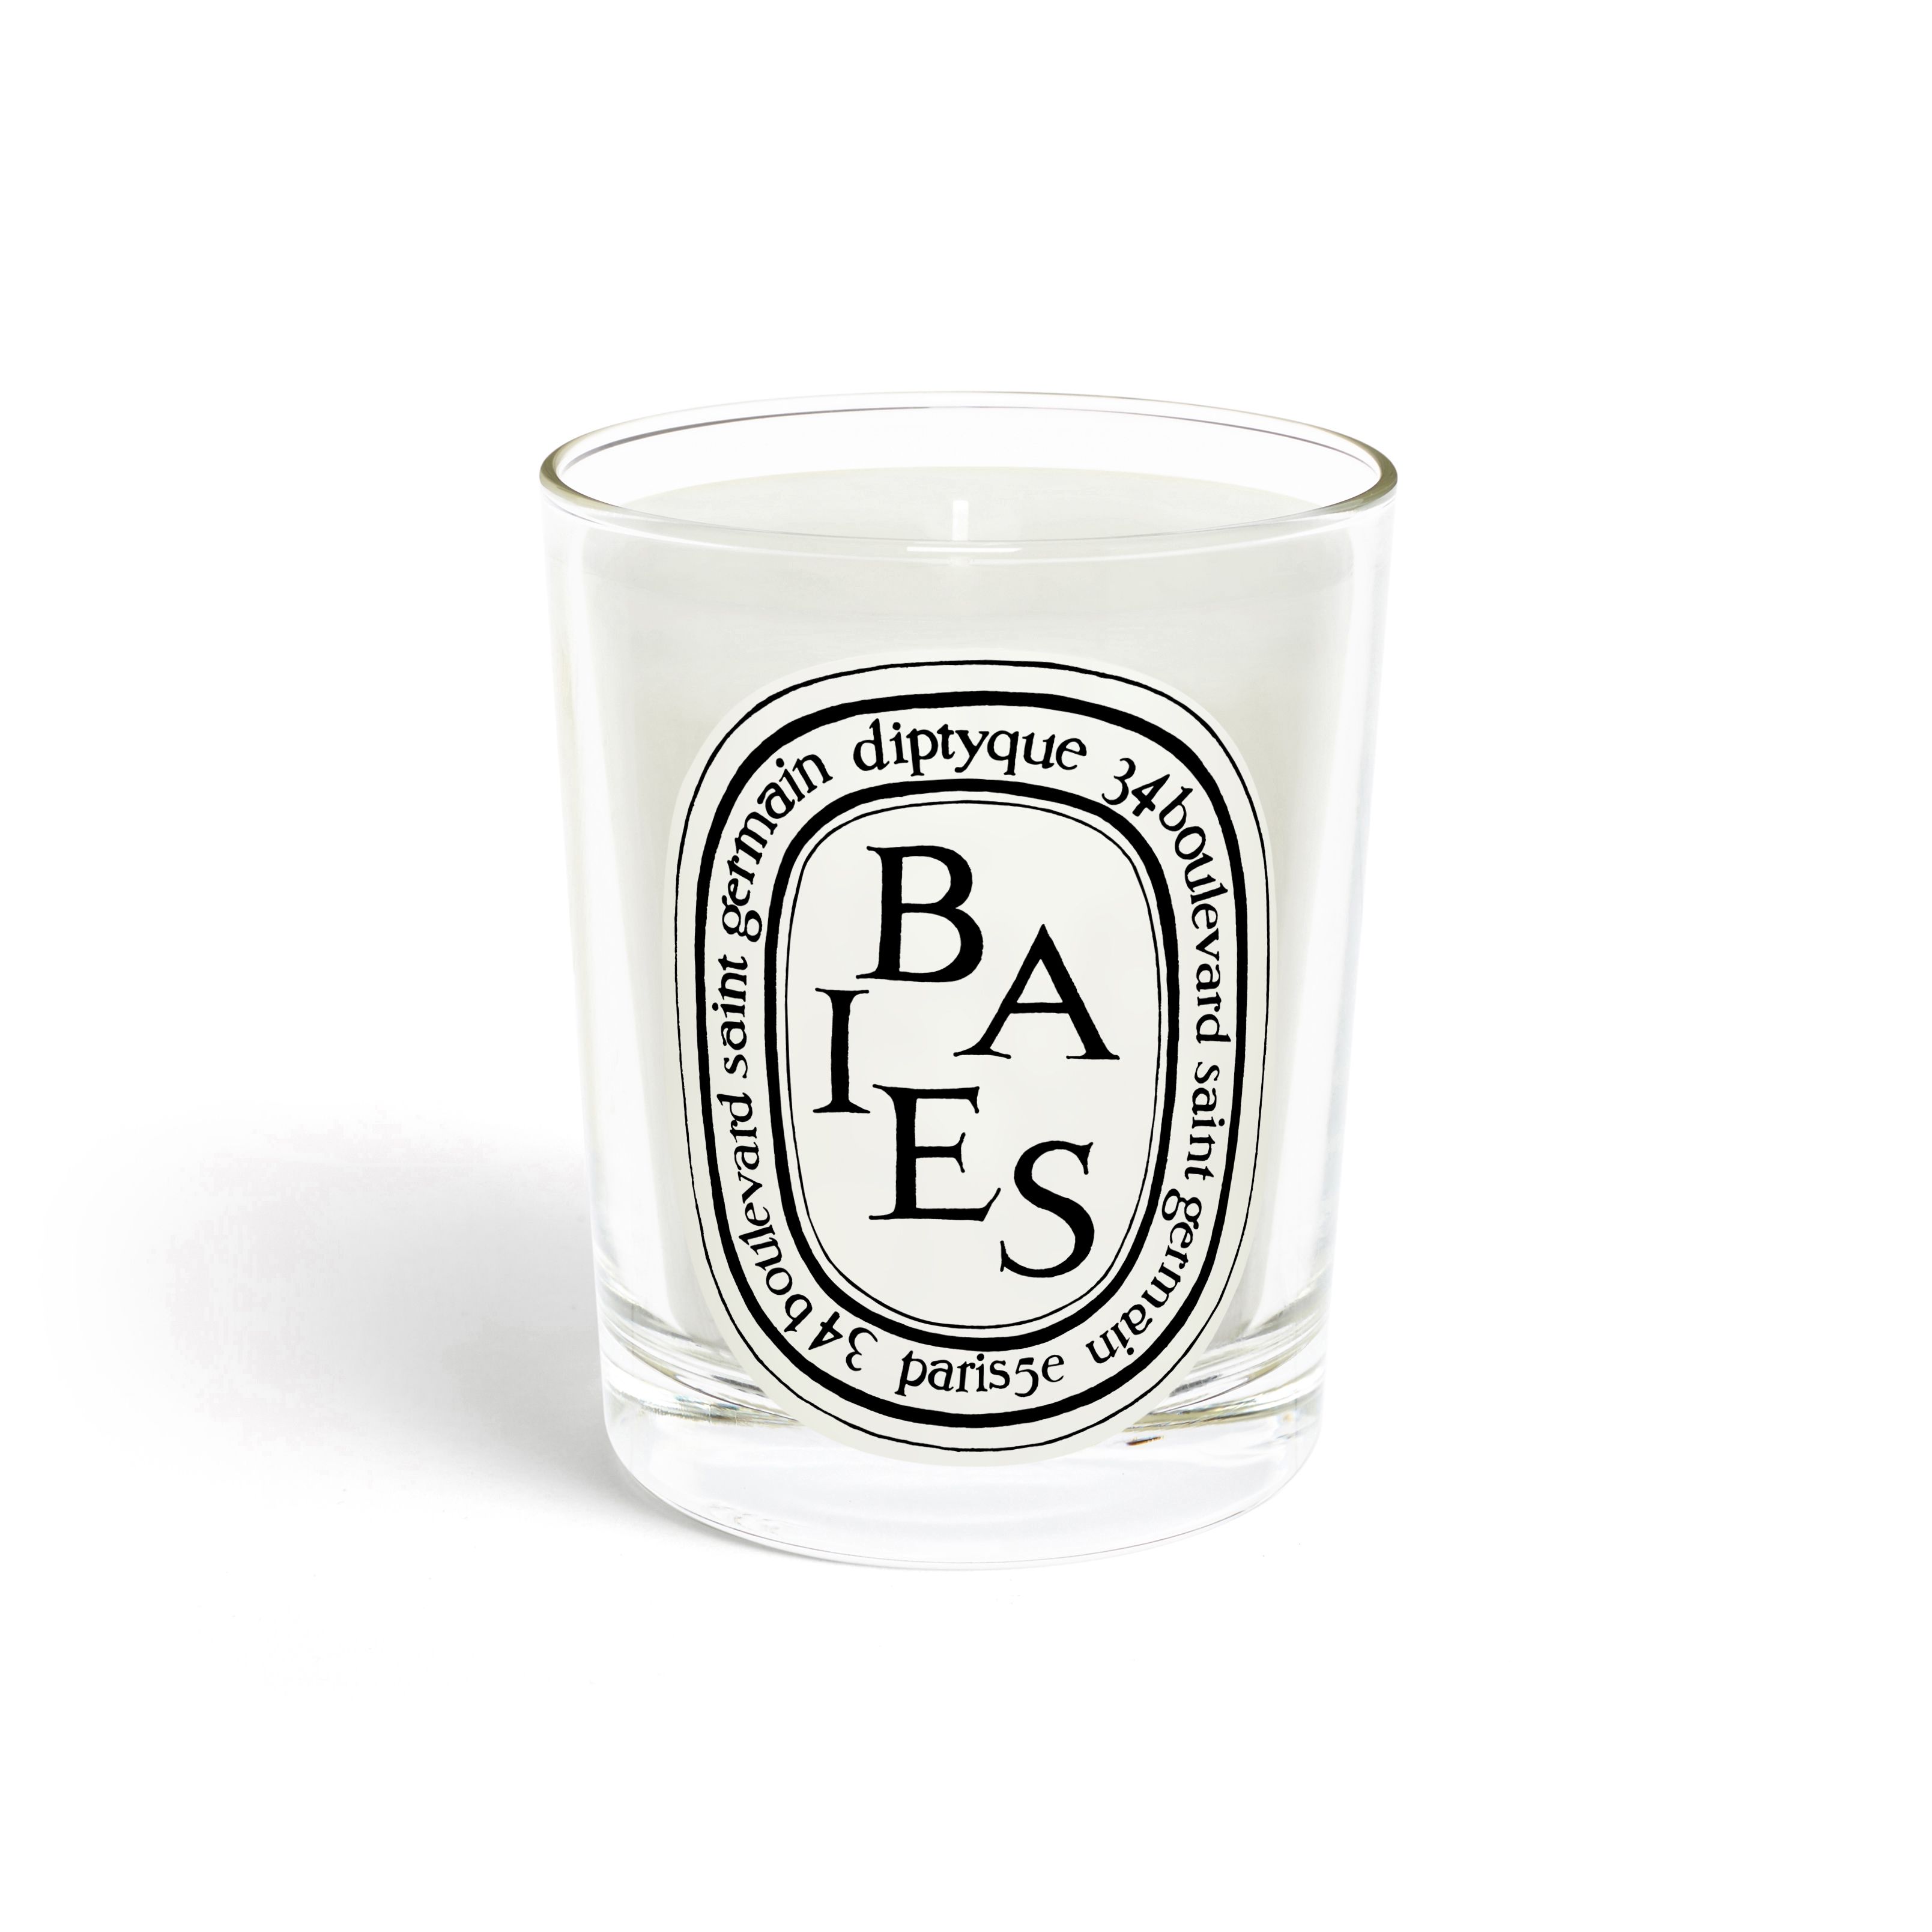 Baies Scented Candle 190g | Space NK - UK